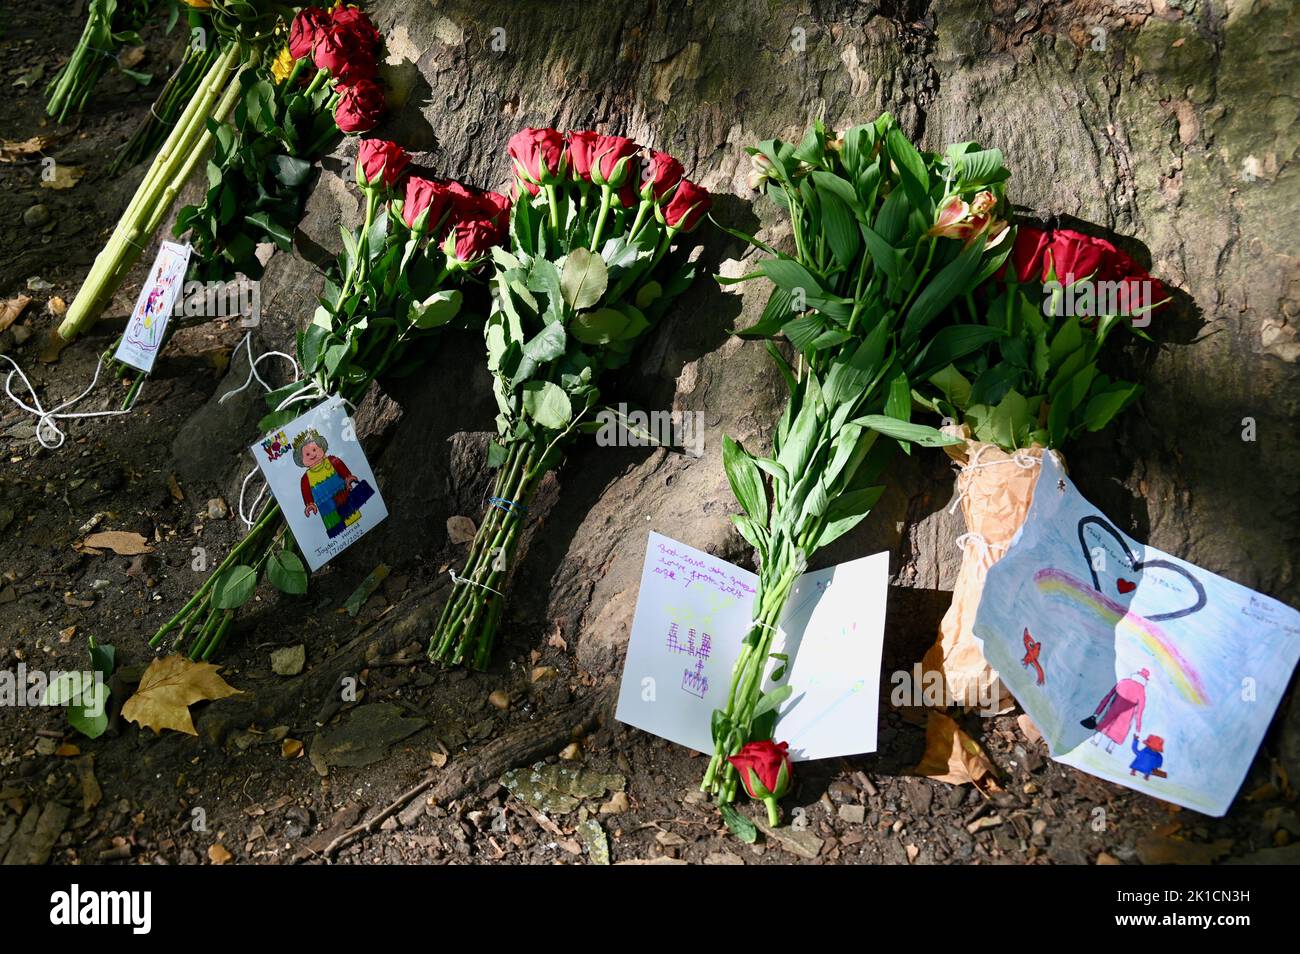 London, UK. Members of the public continued to leave bouquets in the Royal Parks in tribute to Queen Elizabeth II. Credit: michael melia/Alamy Live News Stock Photo